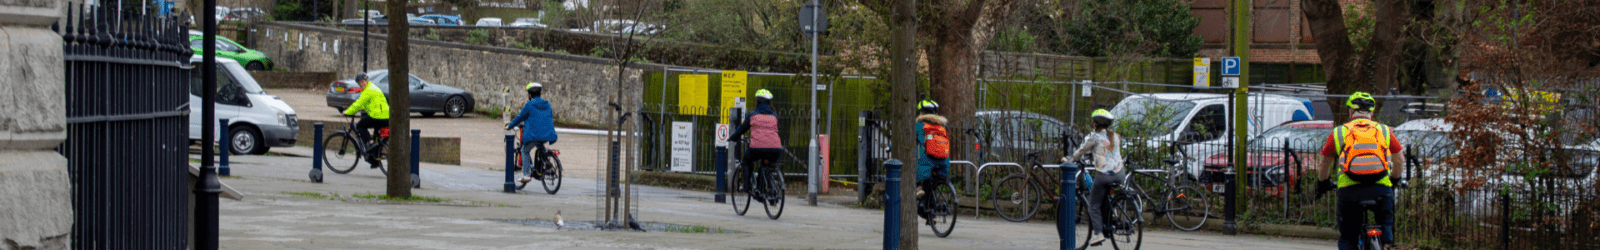 image of people cycling